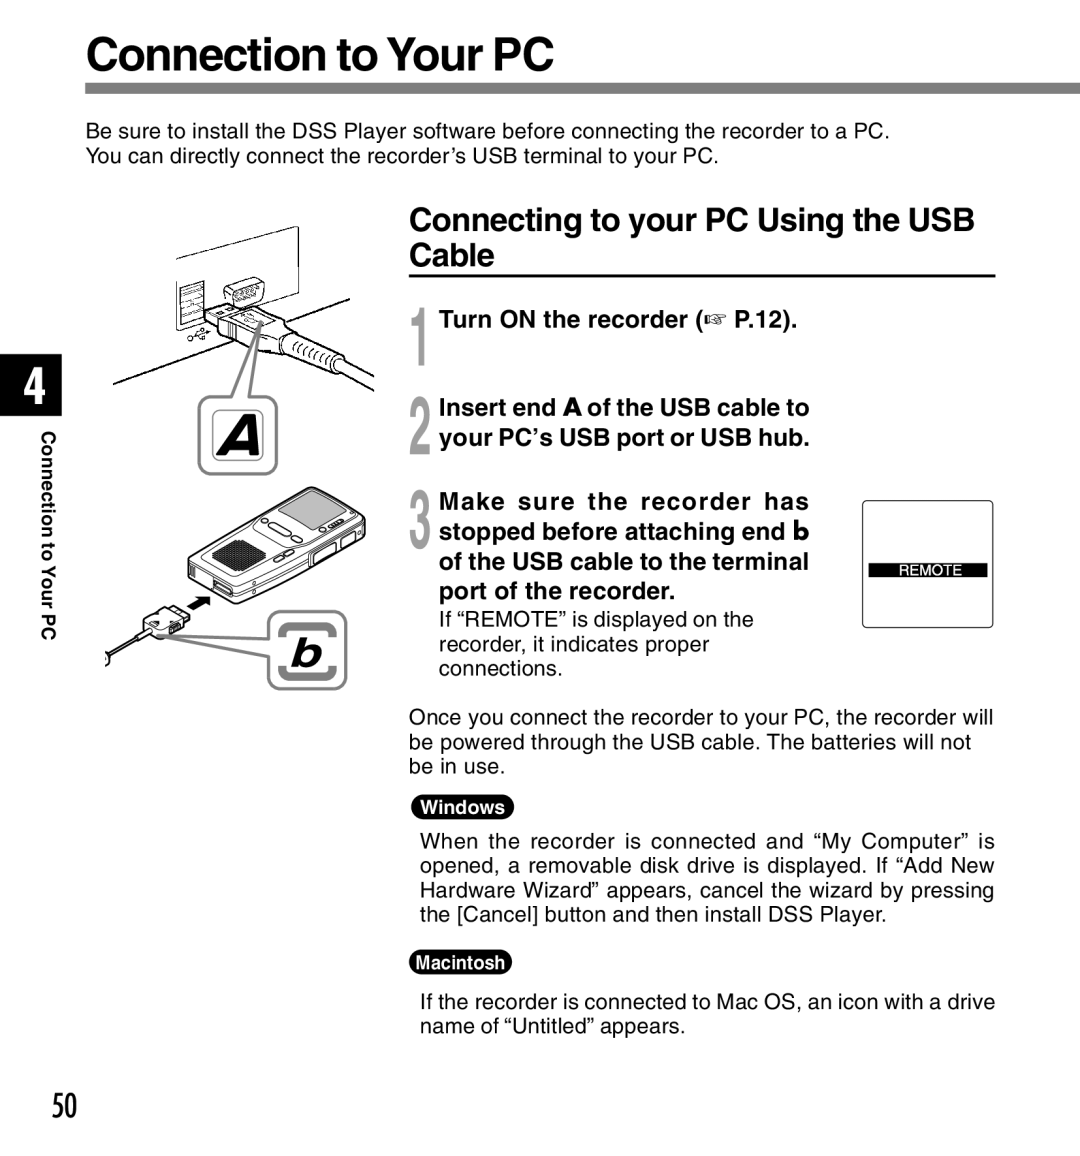 Olympus DS-2300 manual Connection to Your PC, Connecting to your PC Using the USB Cable 